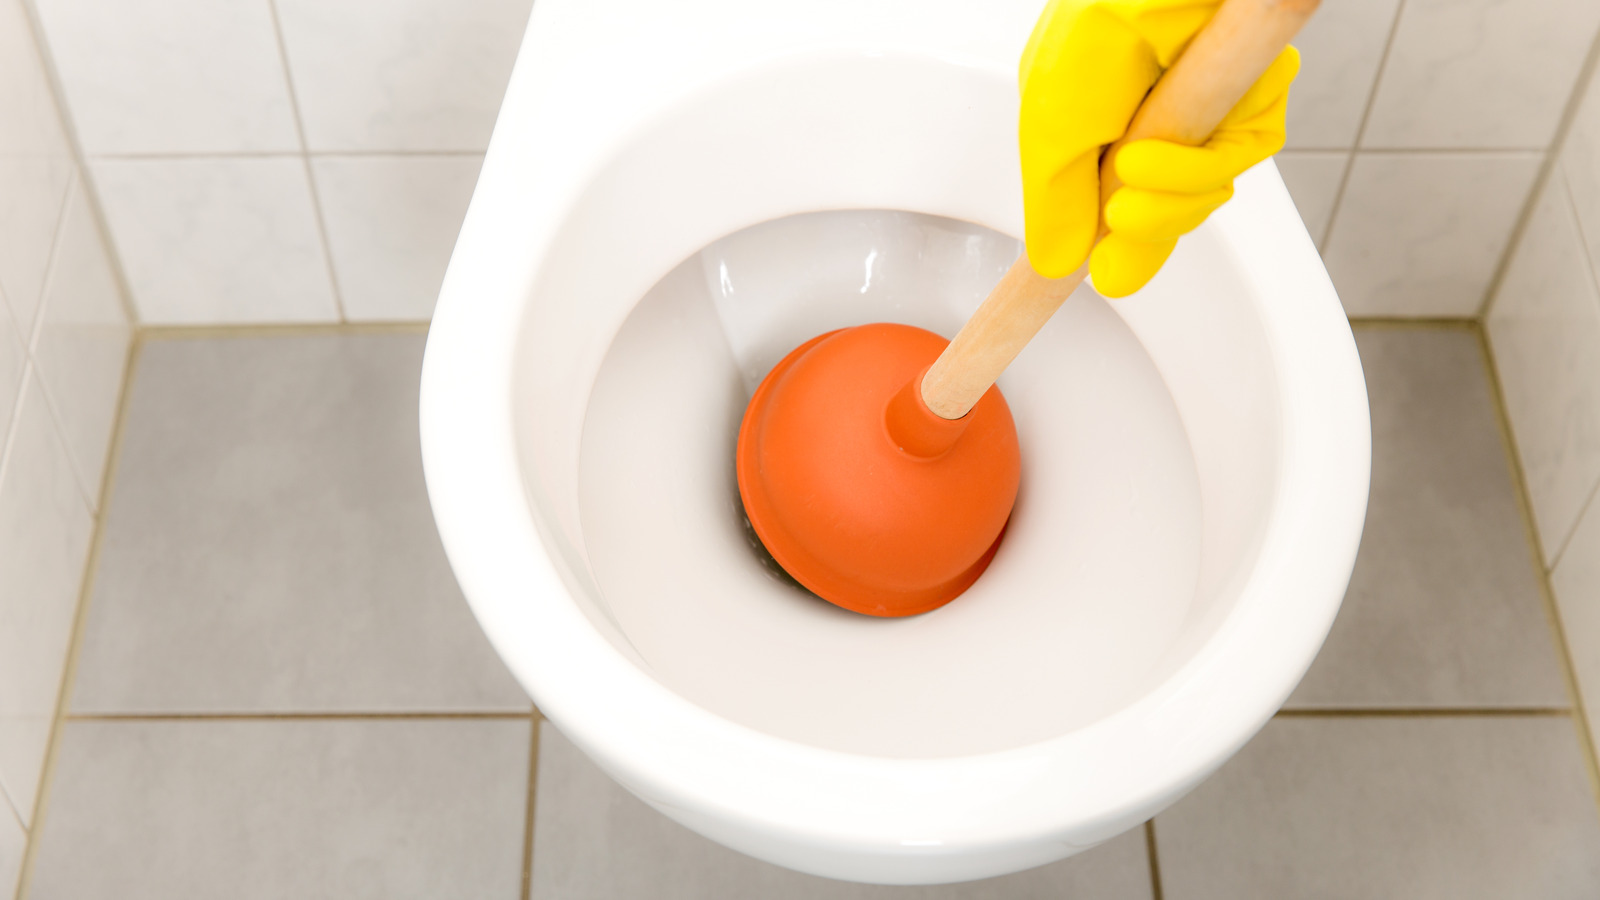 https://www.housedigest.com/img/gallery/why-you-should-think-twice-before-using-the-garbage-bag-trick-to-unclog-your-toilet/l-intro-1674293743.jpg